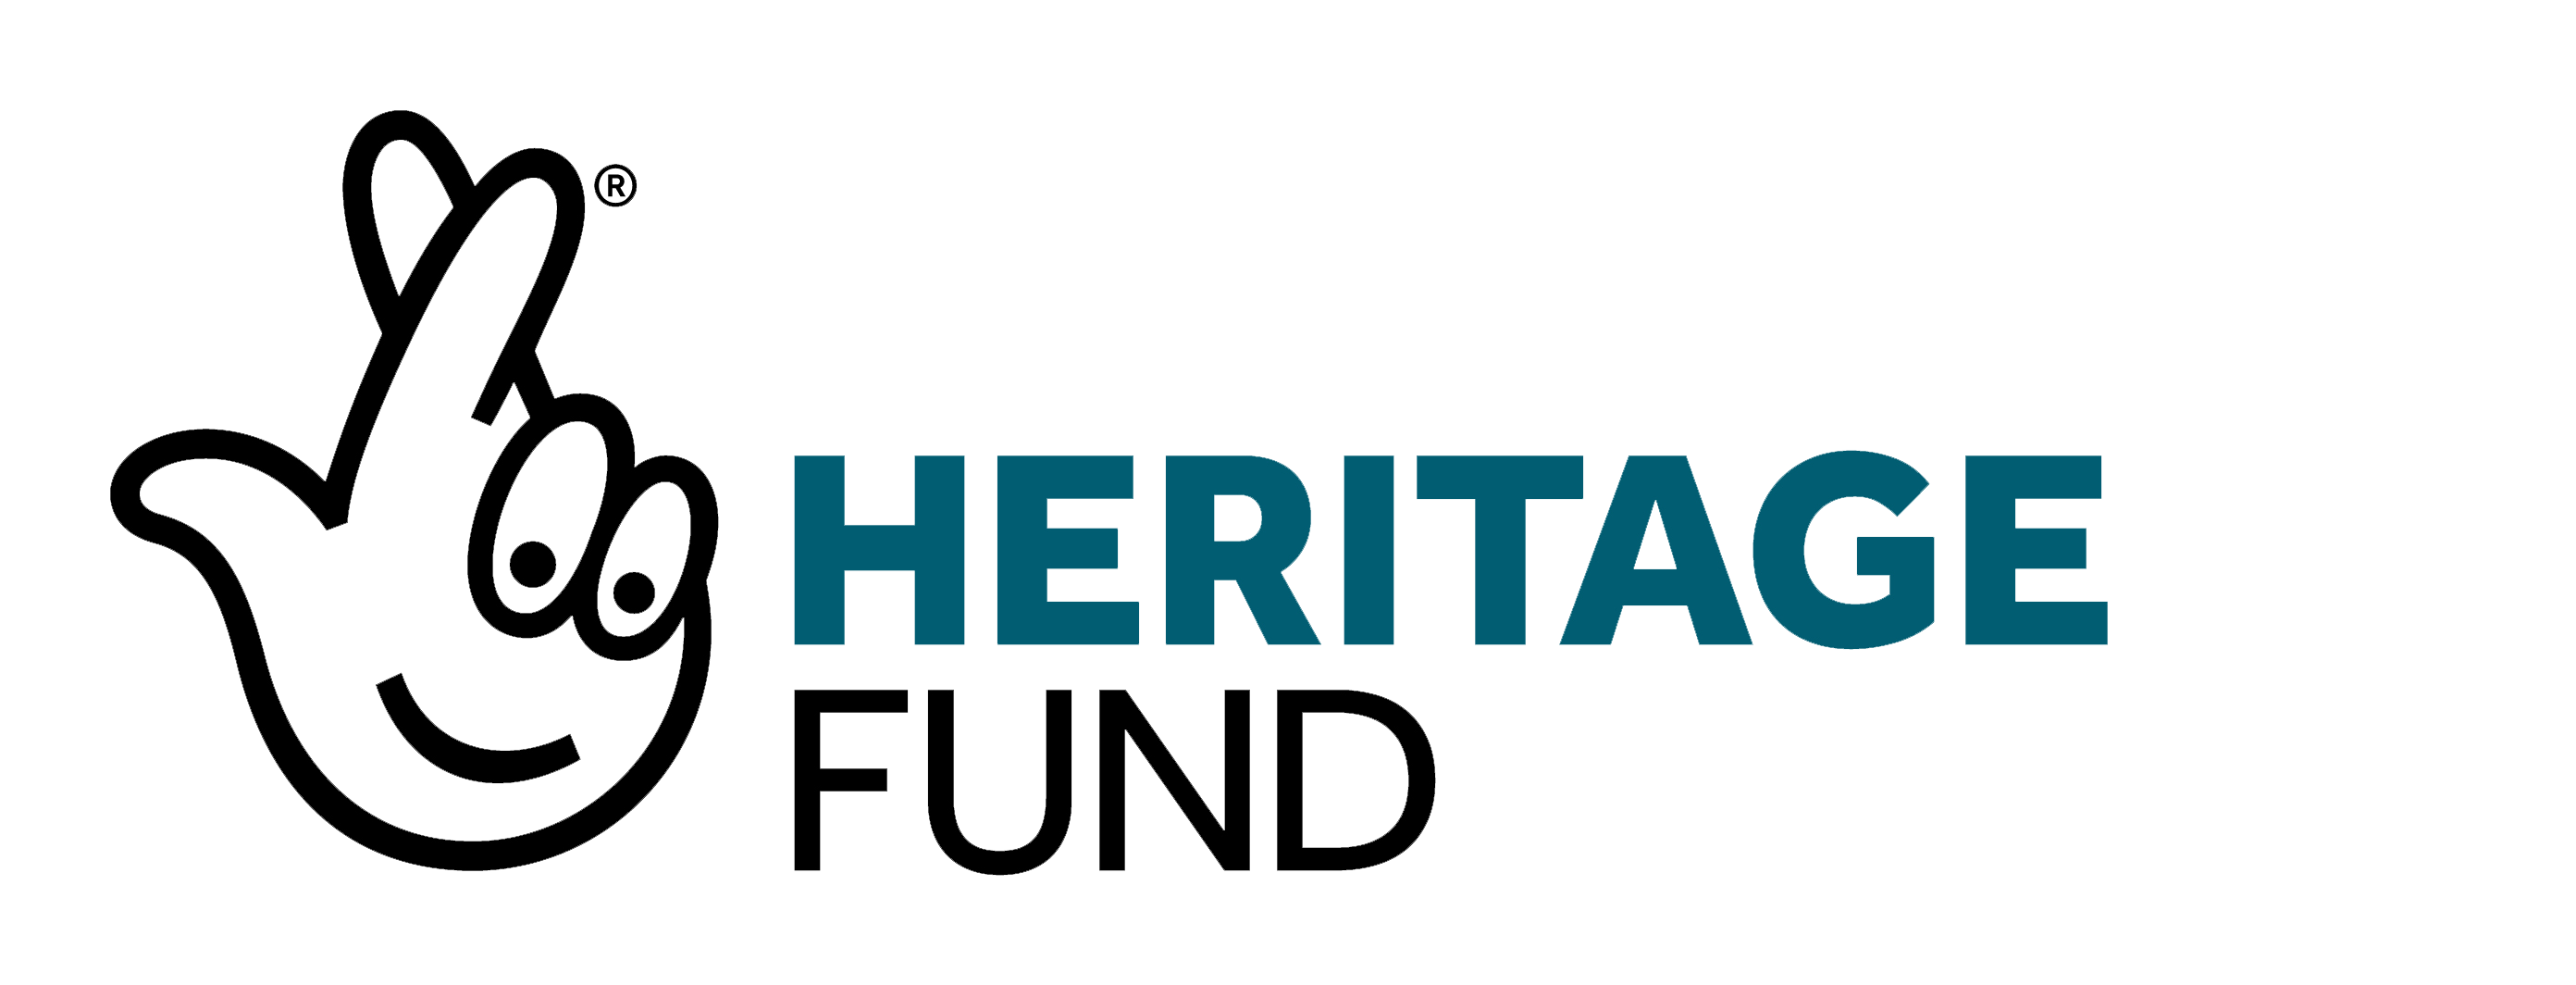 National Lottery Heritage Lottery Fund